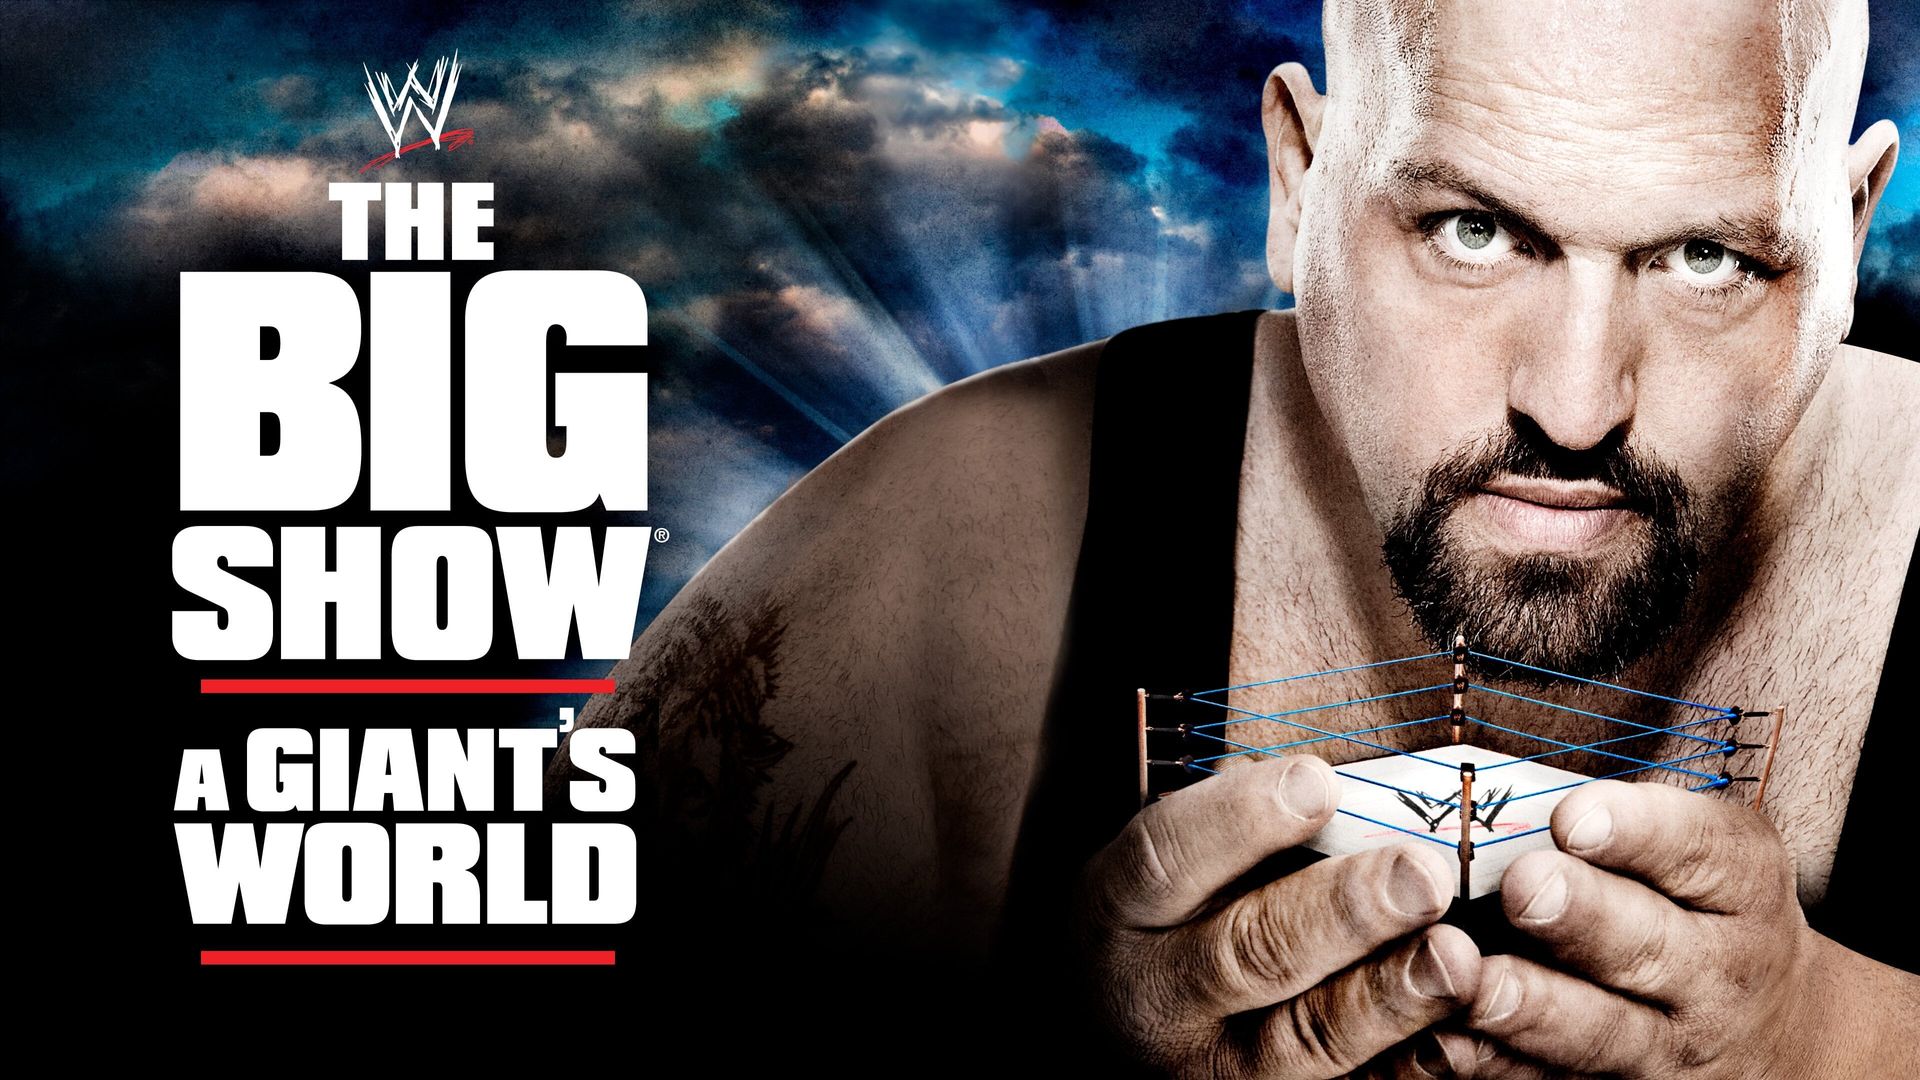 The Big Show: A Giant's World background